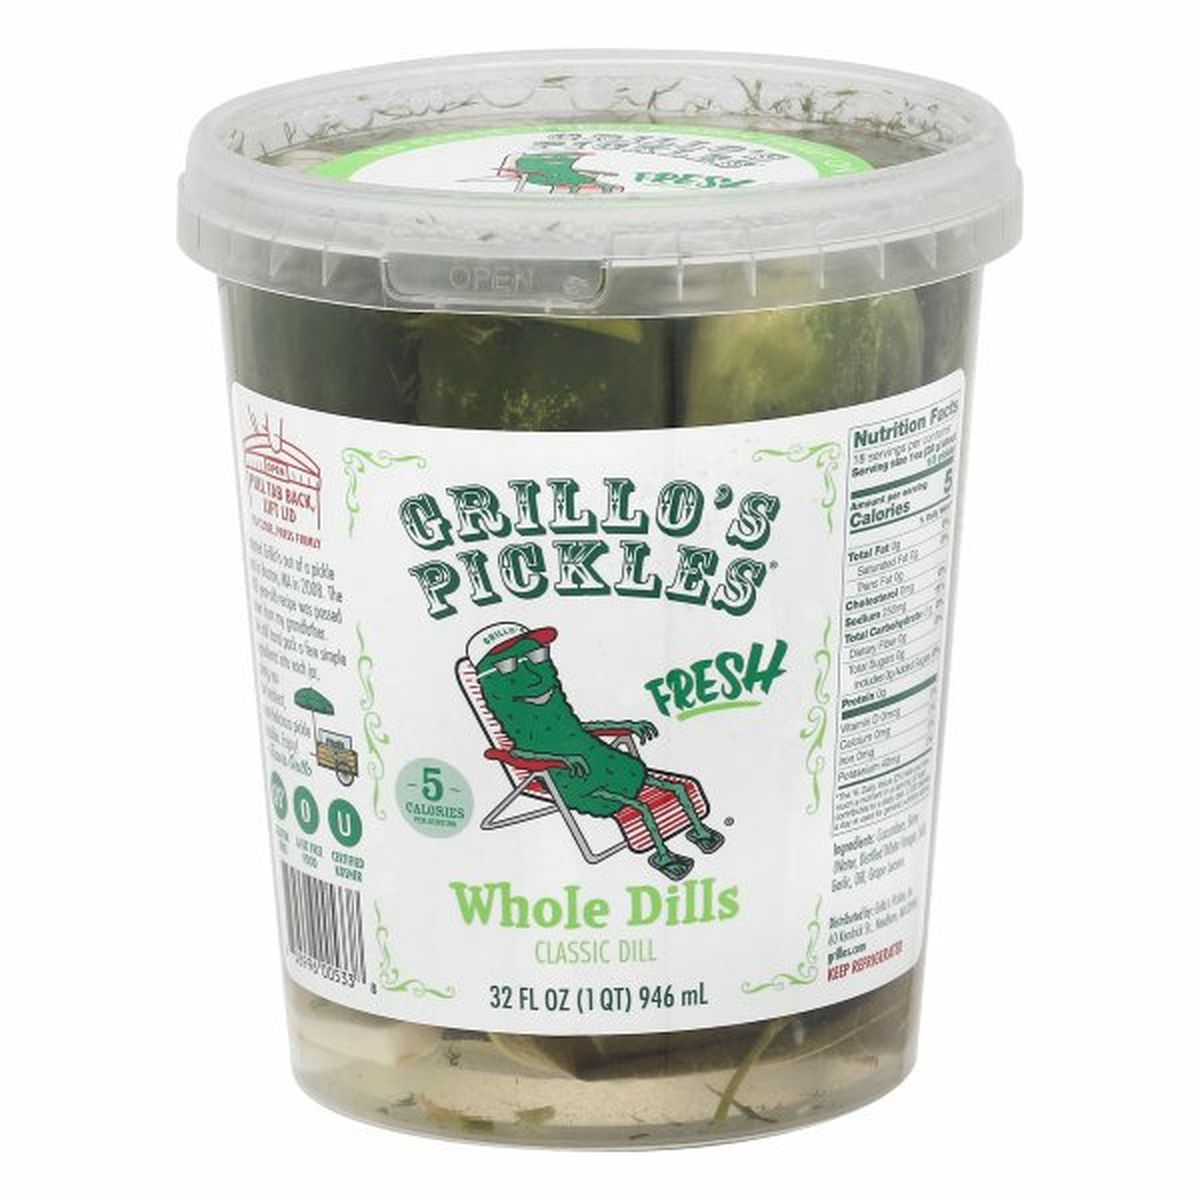 Calories in Grillo's Pickles Whole Dills, Classic Dill, Fresh